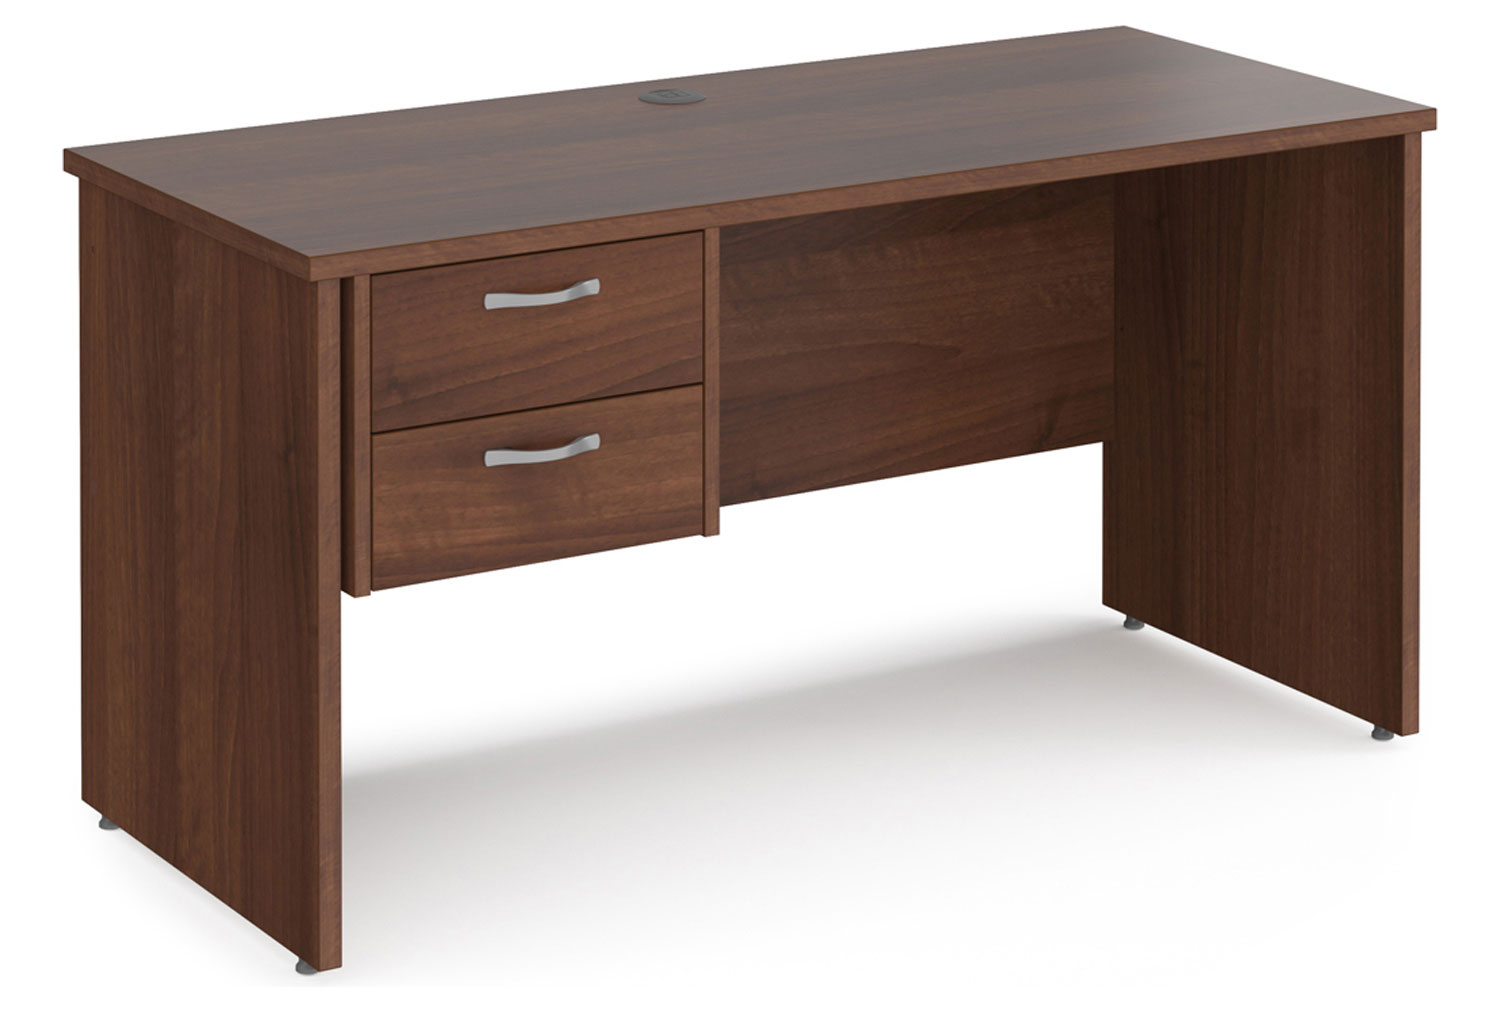 Value Line Deluxe Panel End Narrow Rectangular Office Desk 2 Drawers, 140wx60dx73h (cm), Walnut, Fully Installed